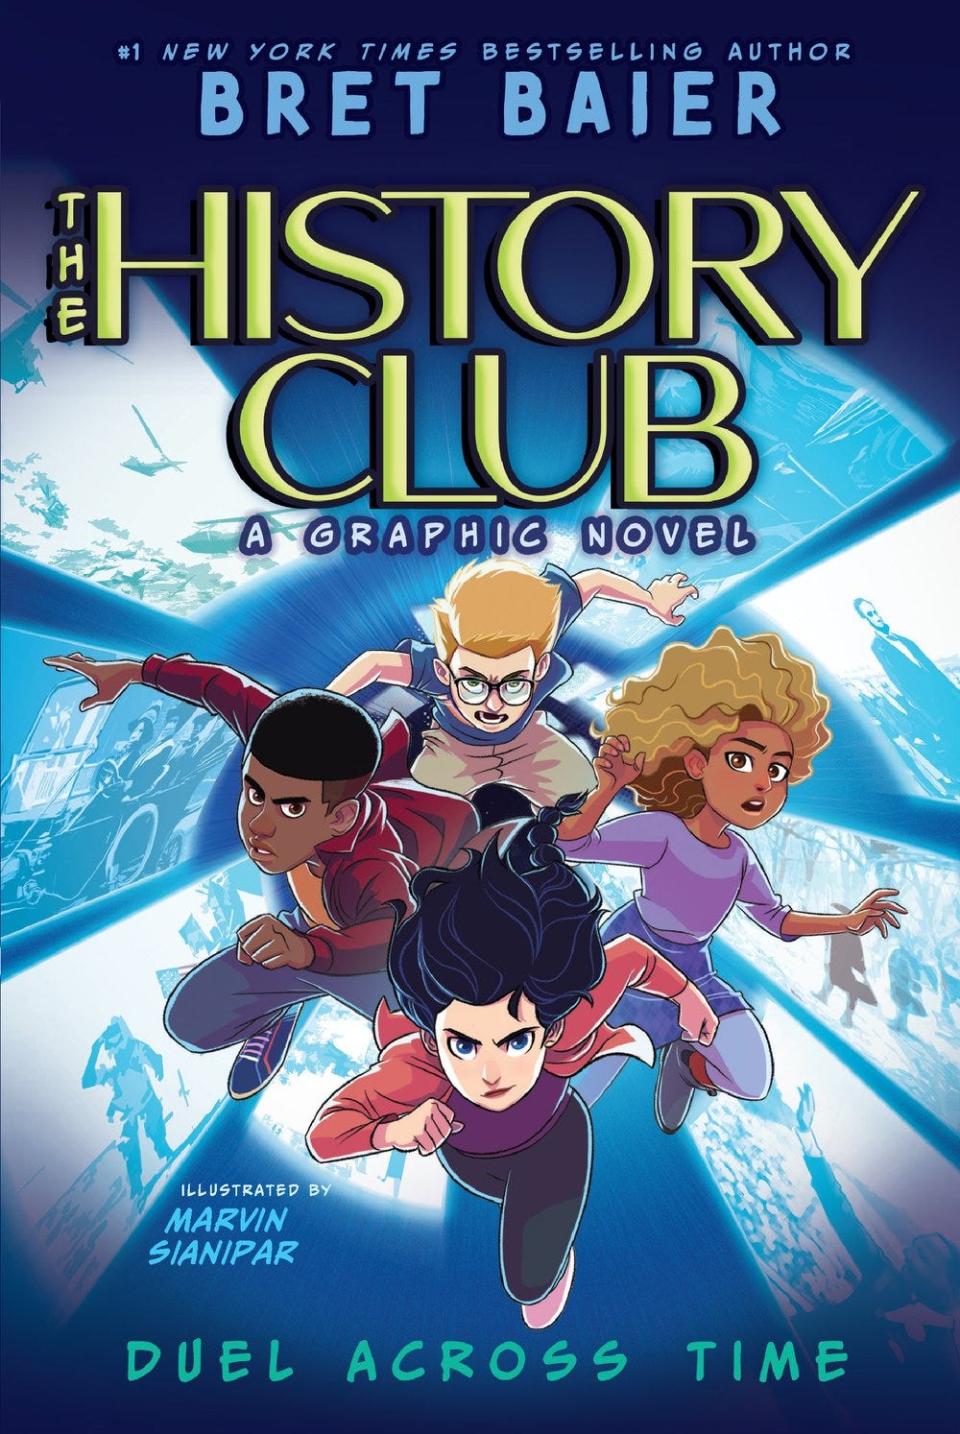 "The History Club: Duel Across Time," by Bret Baier